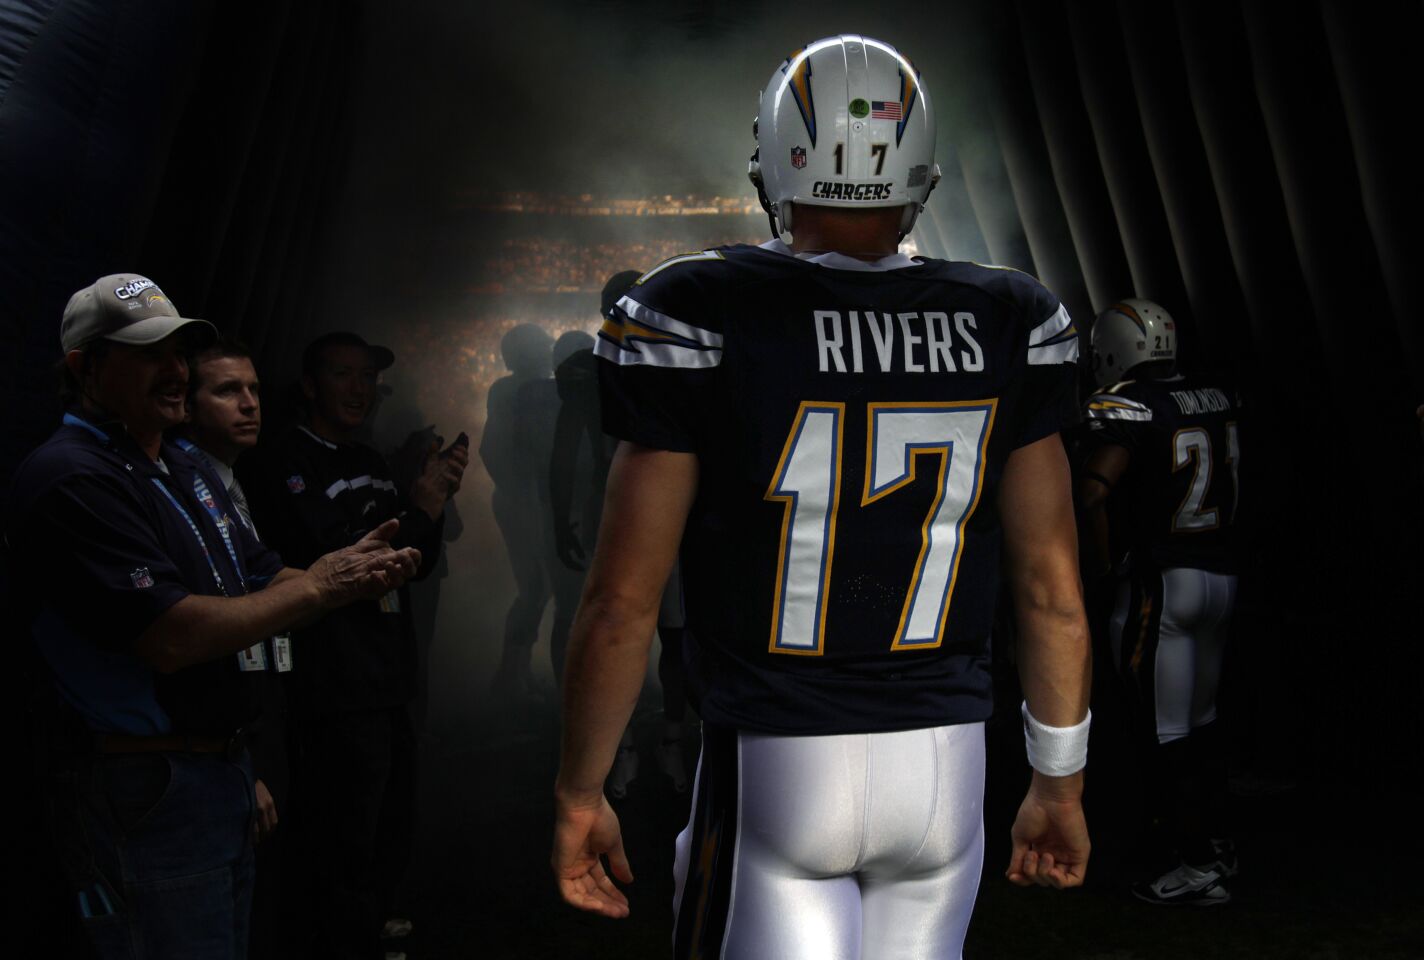 Chargers Philip Rivers waits to be introduced before a game against the Jets game at Qualcomm Stadium on Sunday, Jan. 17, 2010.